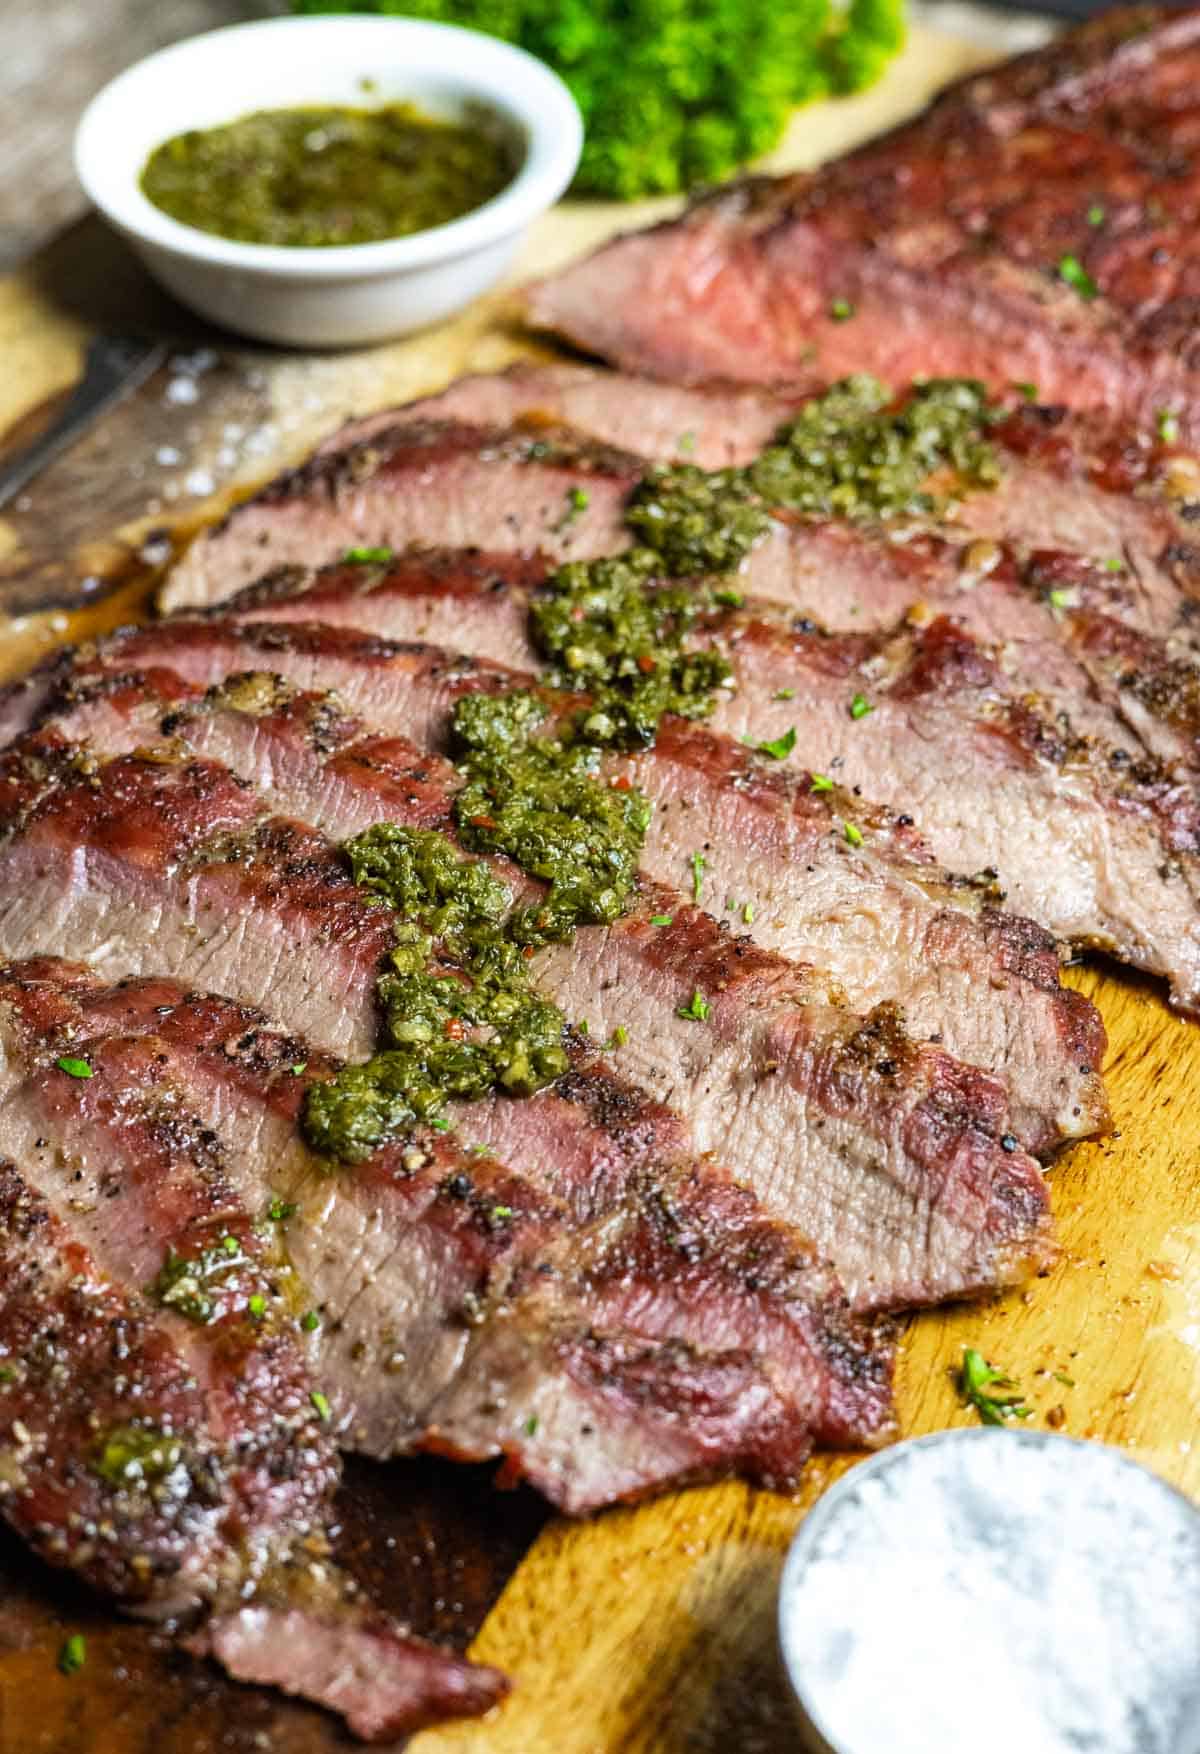 Layered slices of steak on a board with chimichurri verde down the center of slices with a small bowl of sauce and salt.